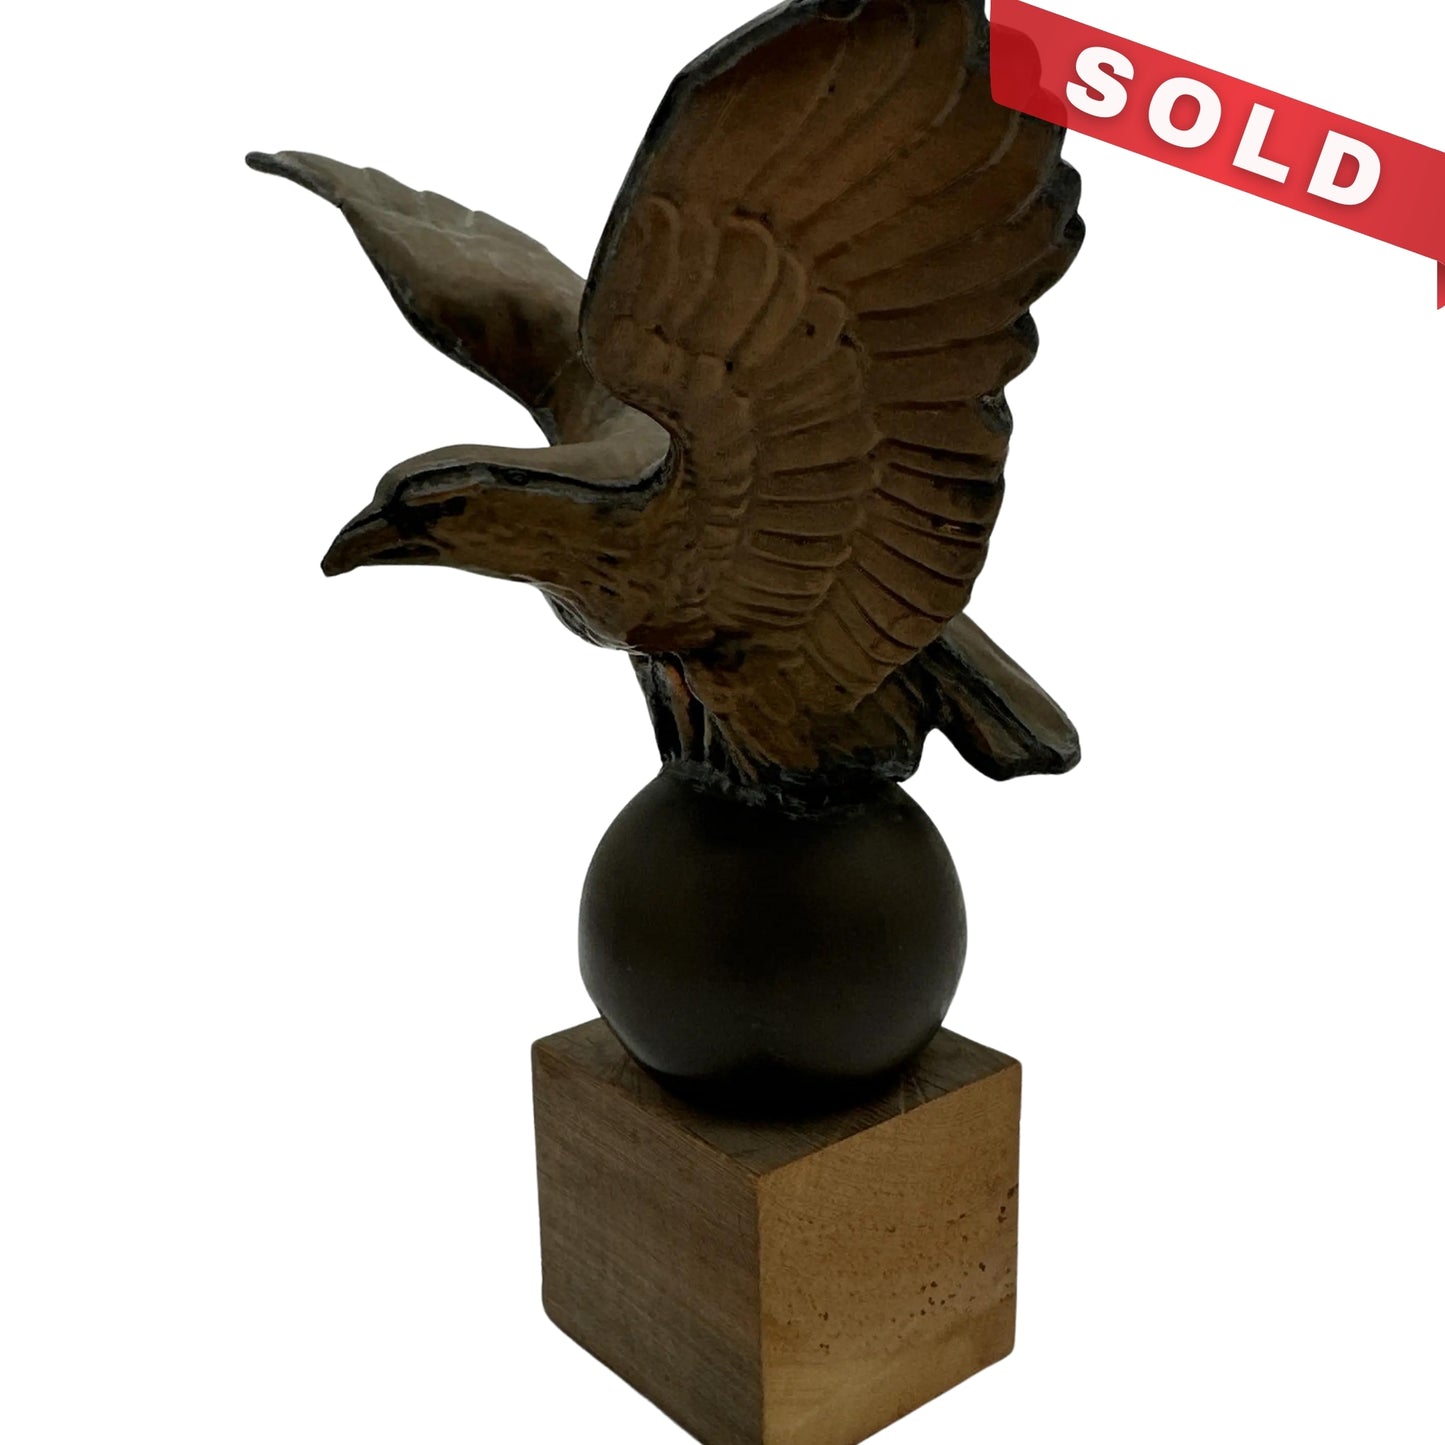 Hand hammered copper eagle flagpole topper